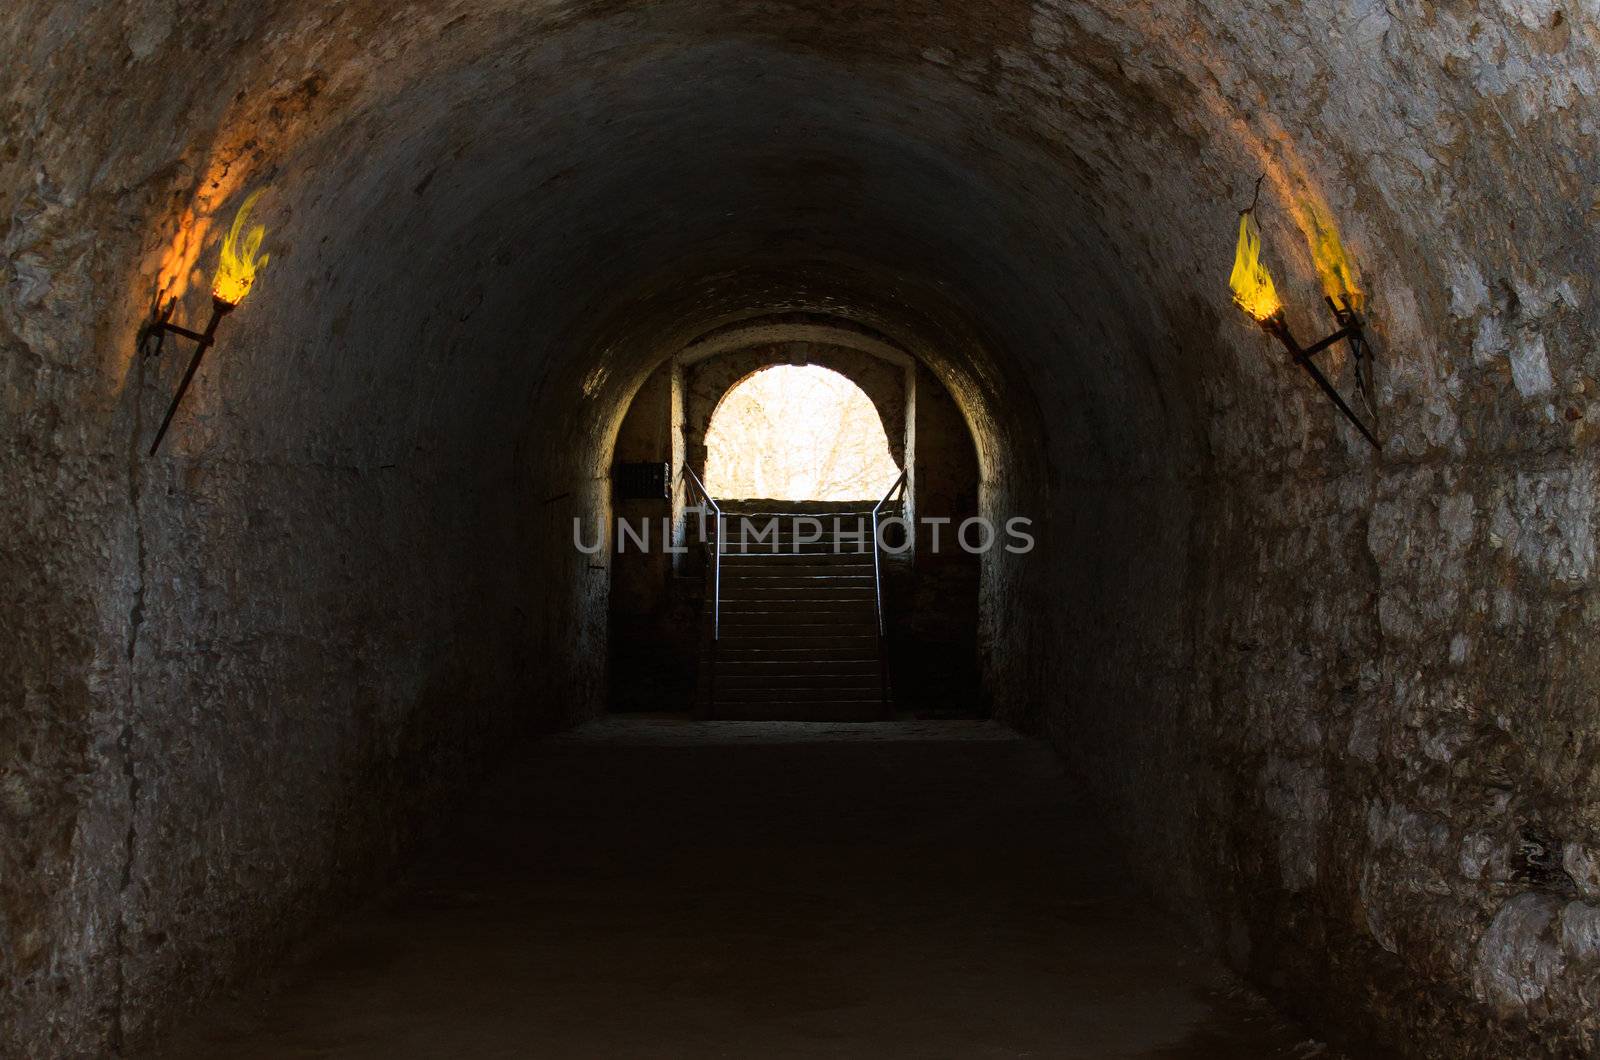 catacombs of the old castle illuminated burning torches